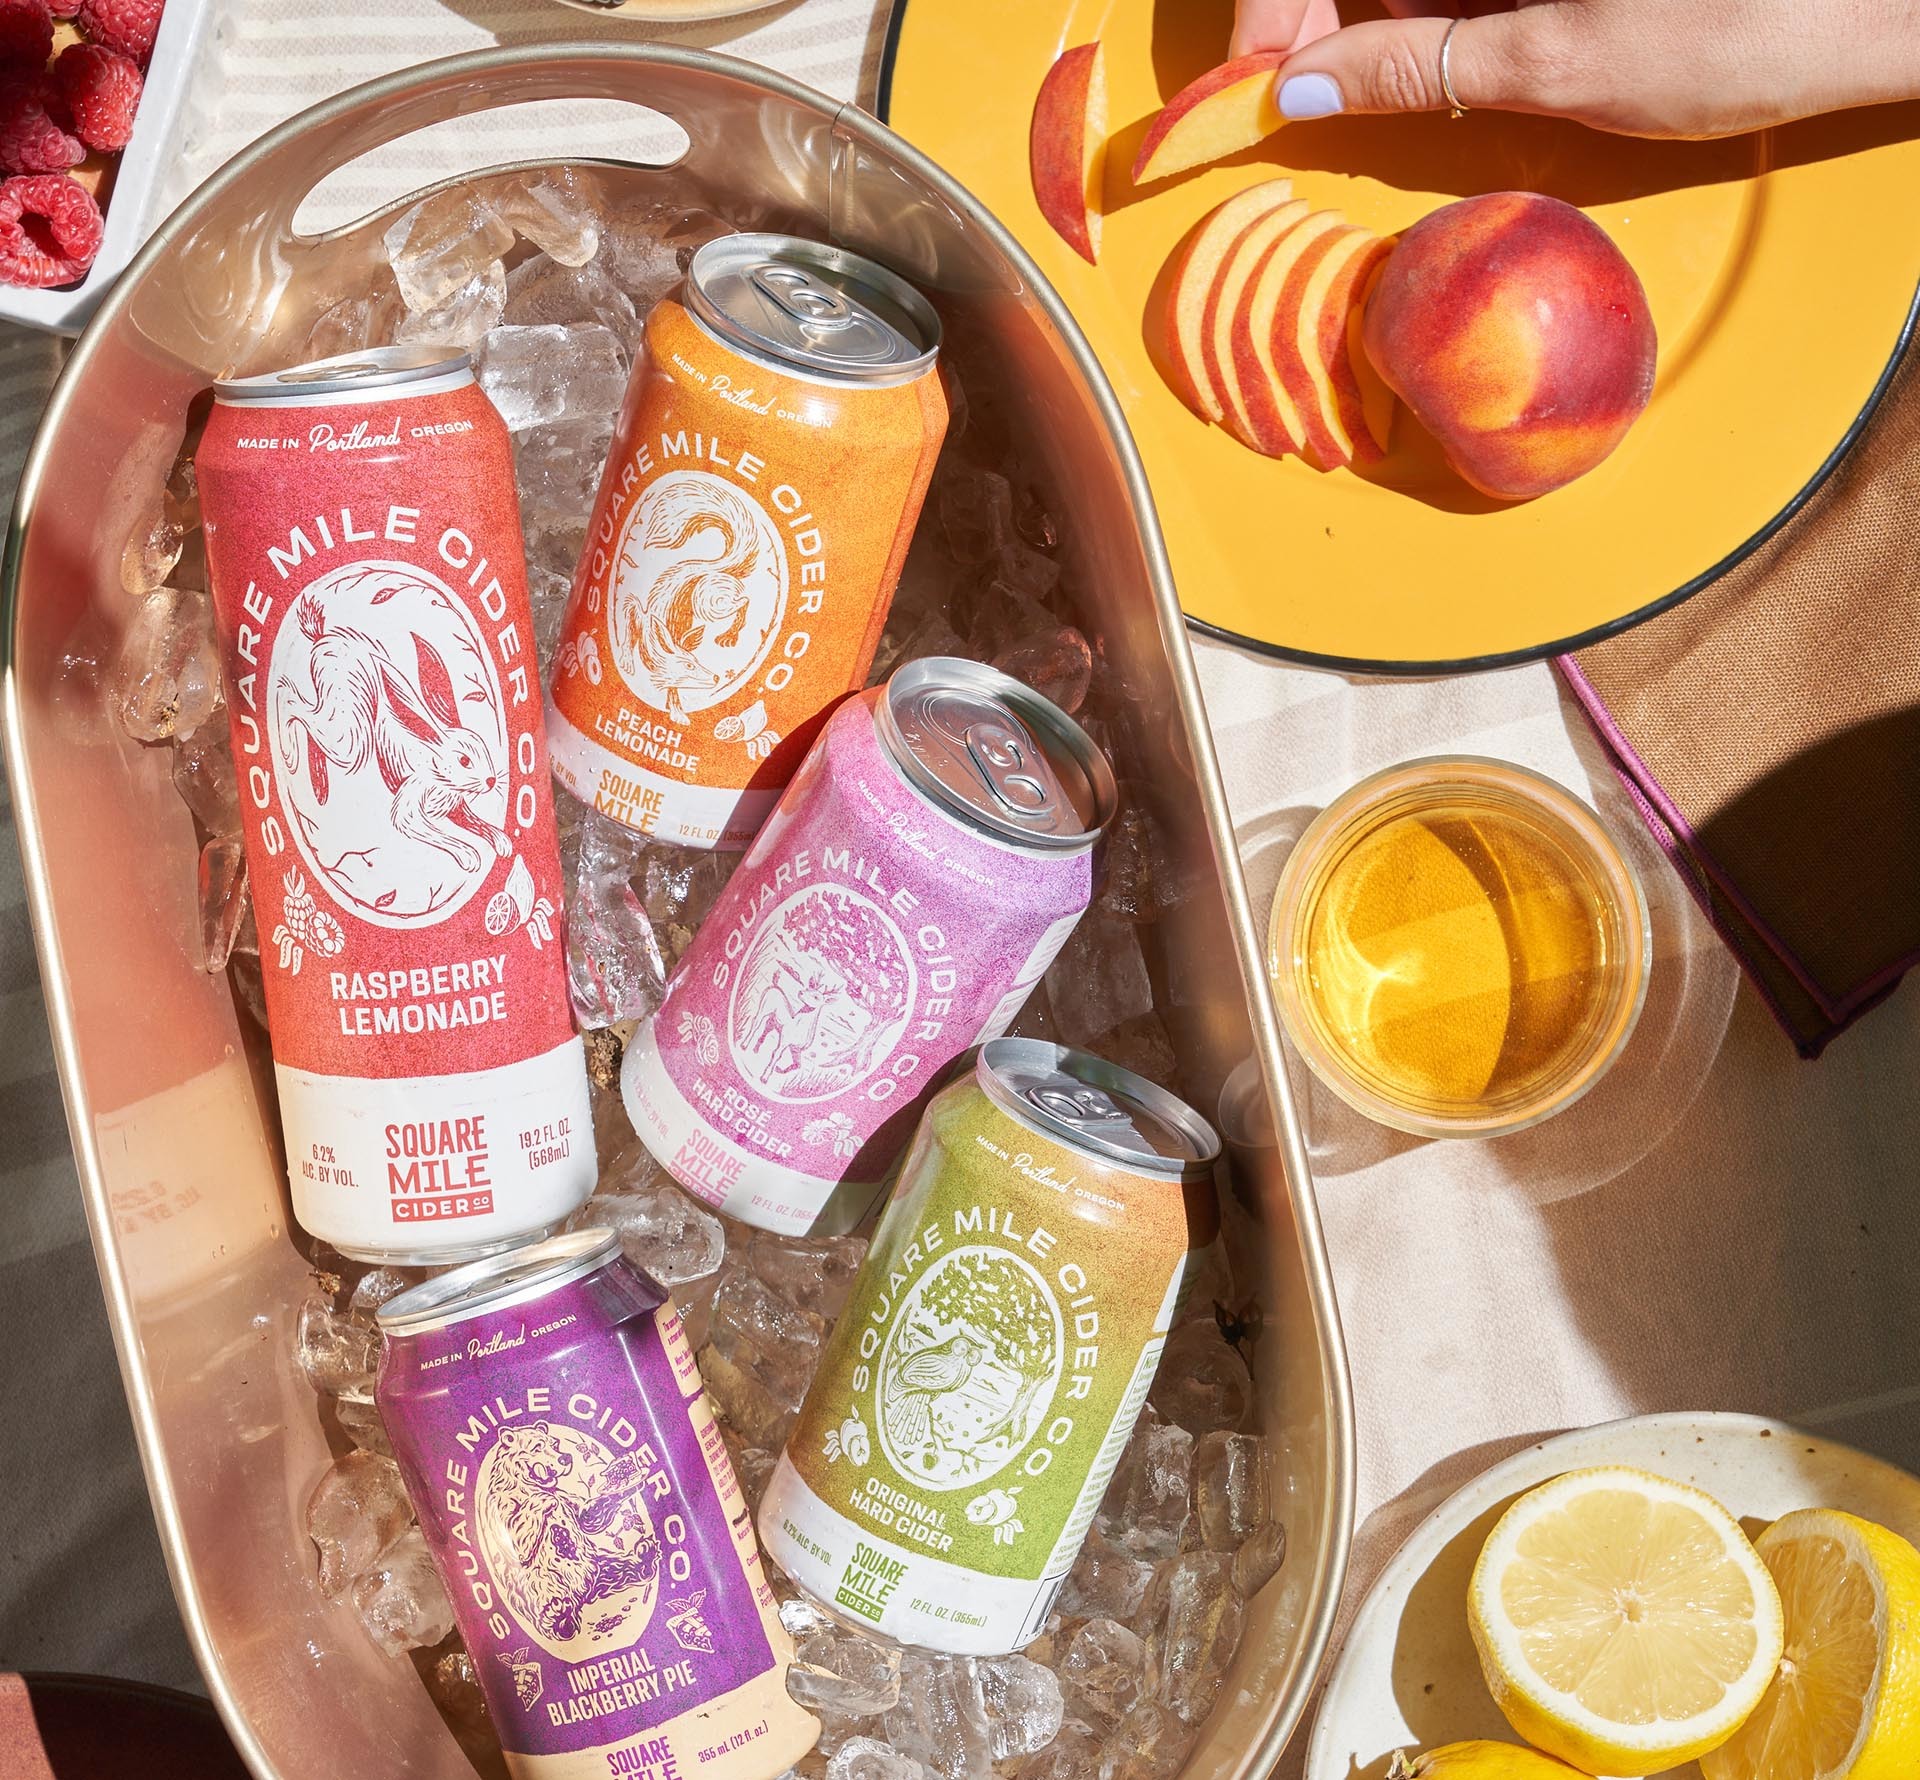 An overhead view of a big bucket filled with ice and cans of Square Mile Cider with fruit on plates on a table